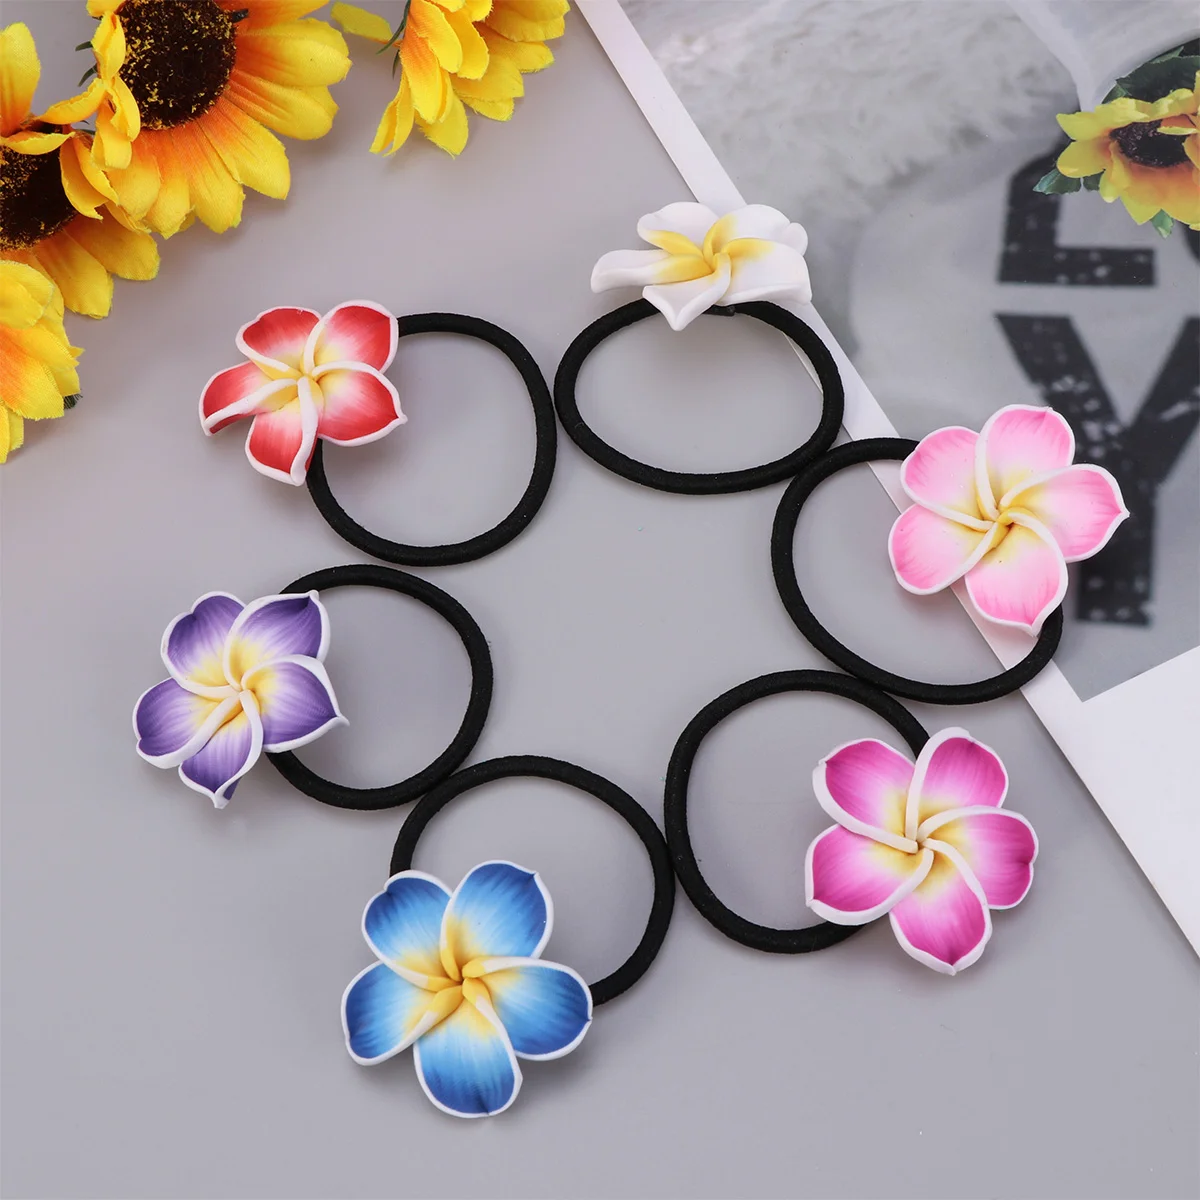 

12pcs Plumeria Hair Ties Hawaiian Beach Flower Hair Ropes Colorful Floral Rubber Bands Elastic Ponytail Holders for